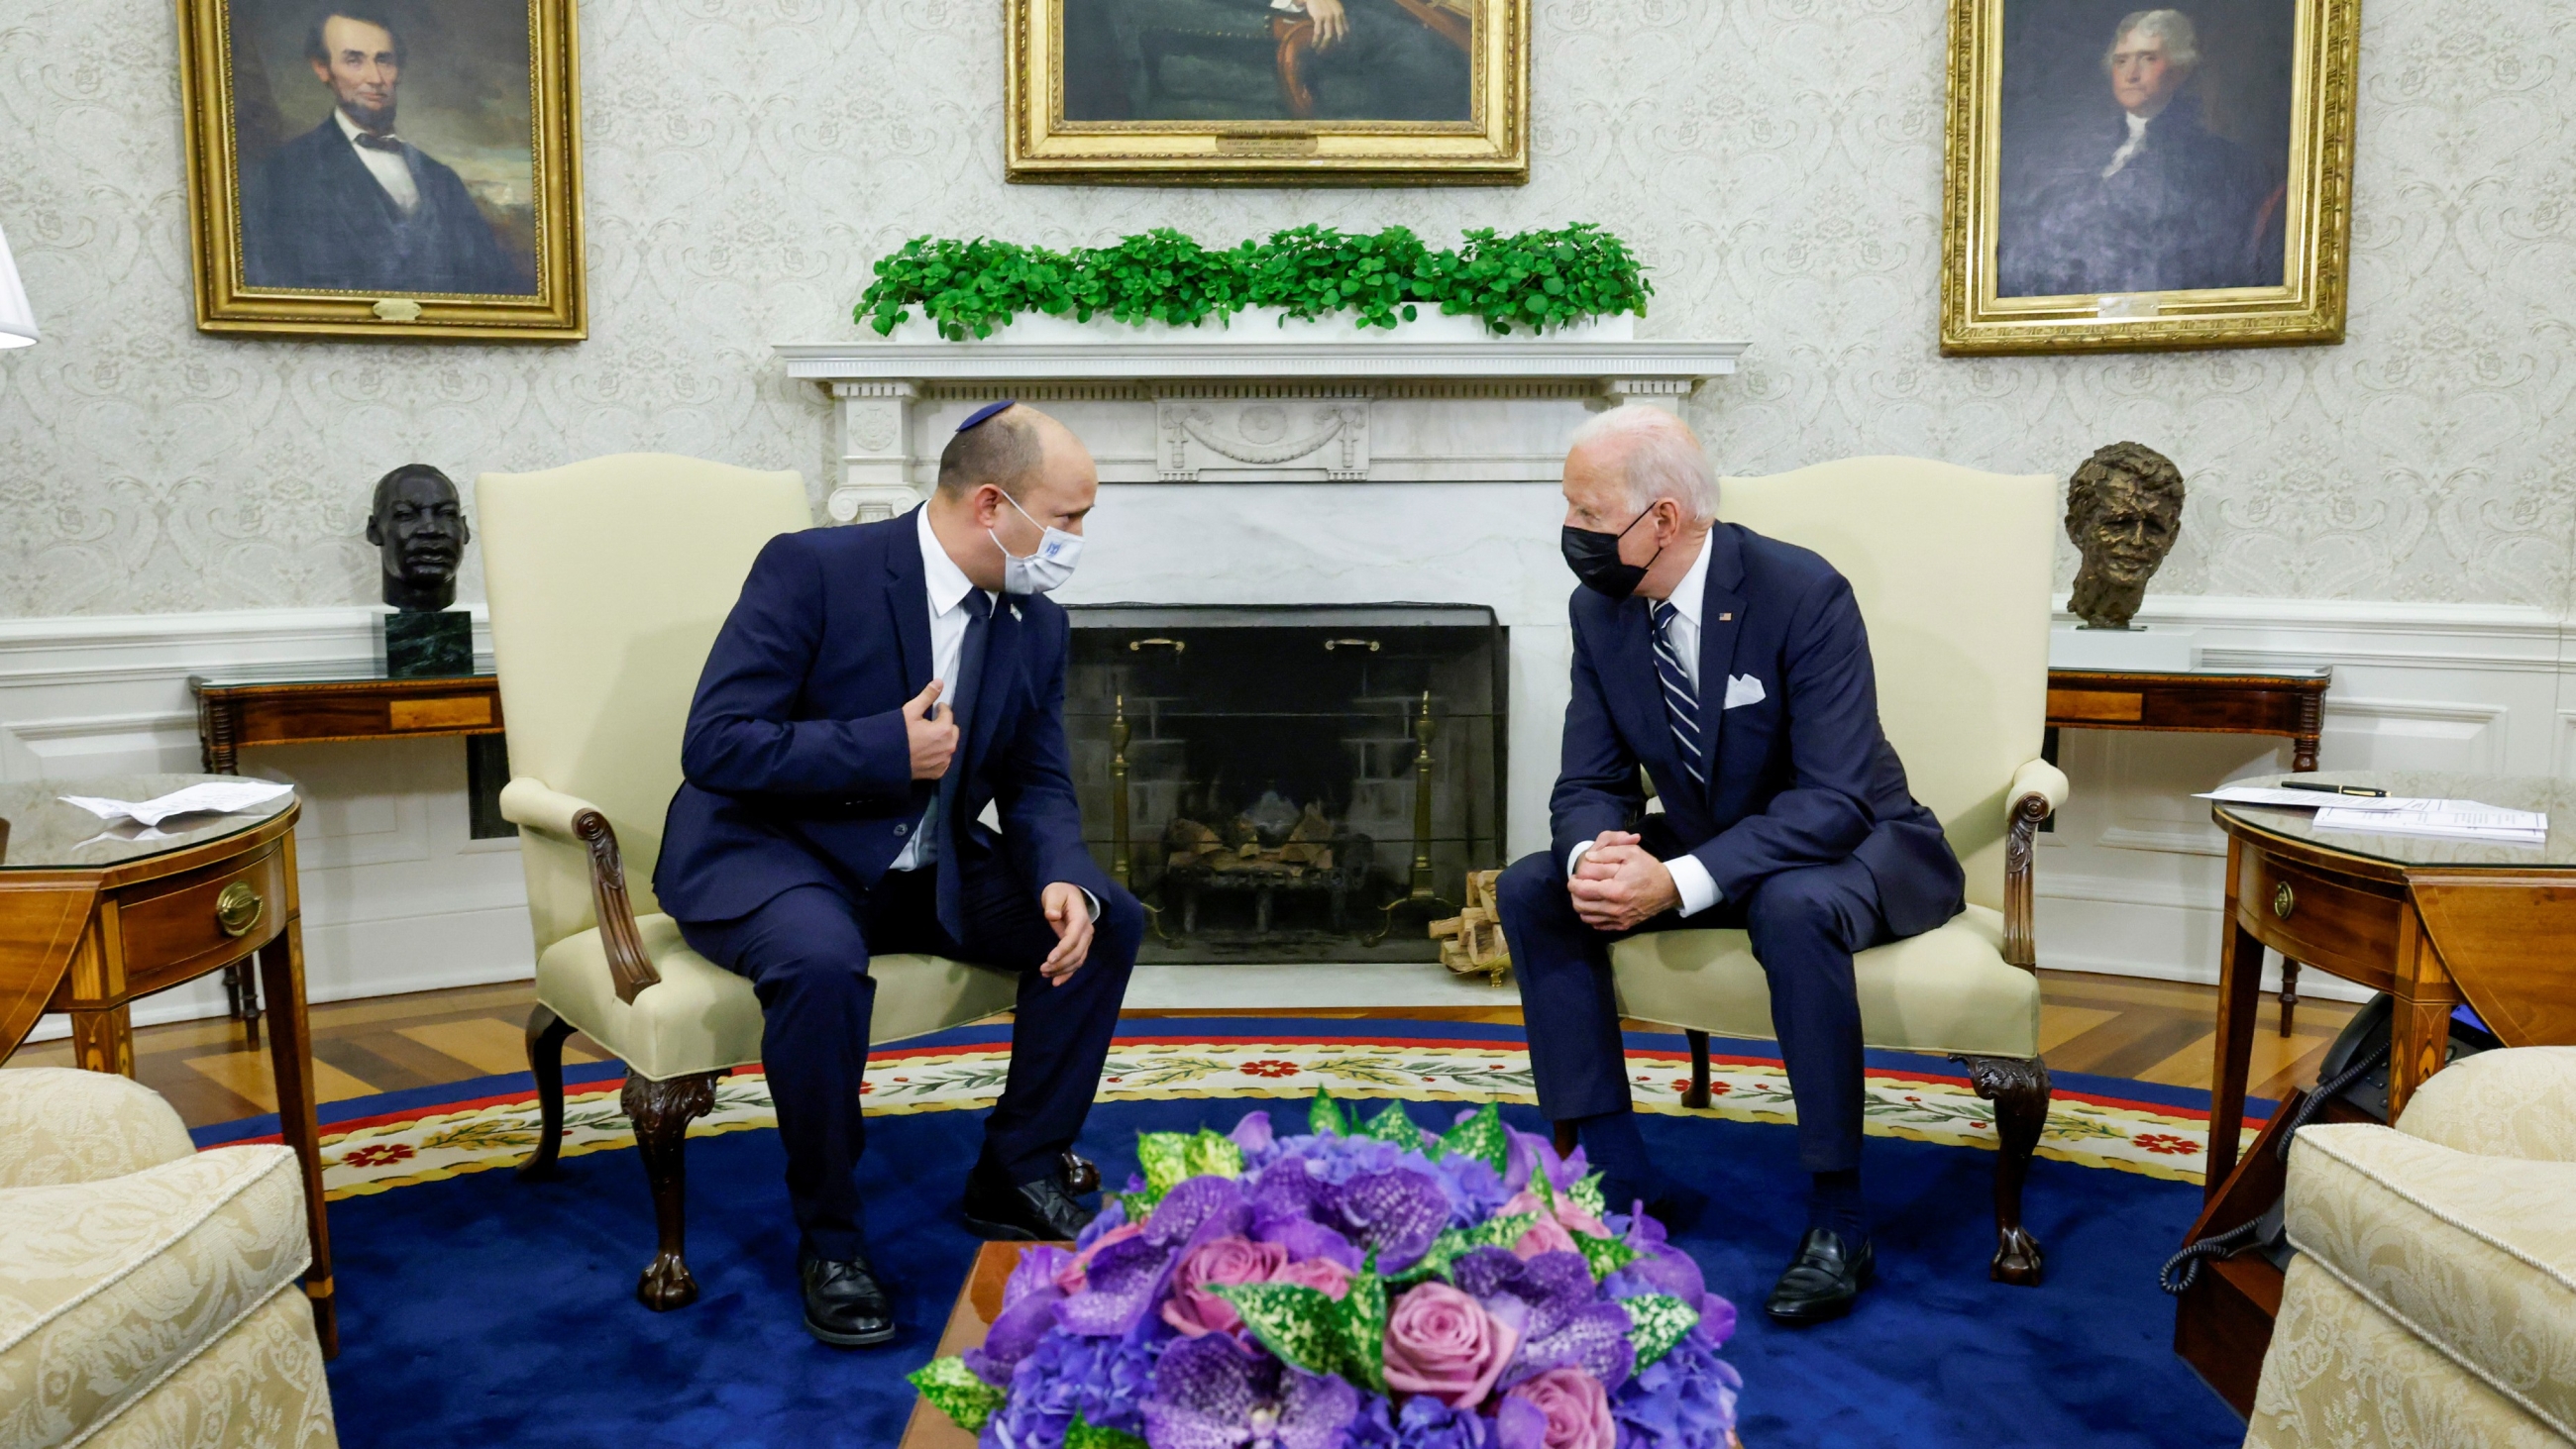 US President Joe Biden and Israel's Prime Minister Naftali Bennett during a meeting at White House in Washington on 27 August 2021. (Reuters)